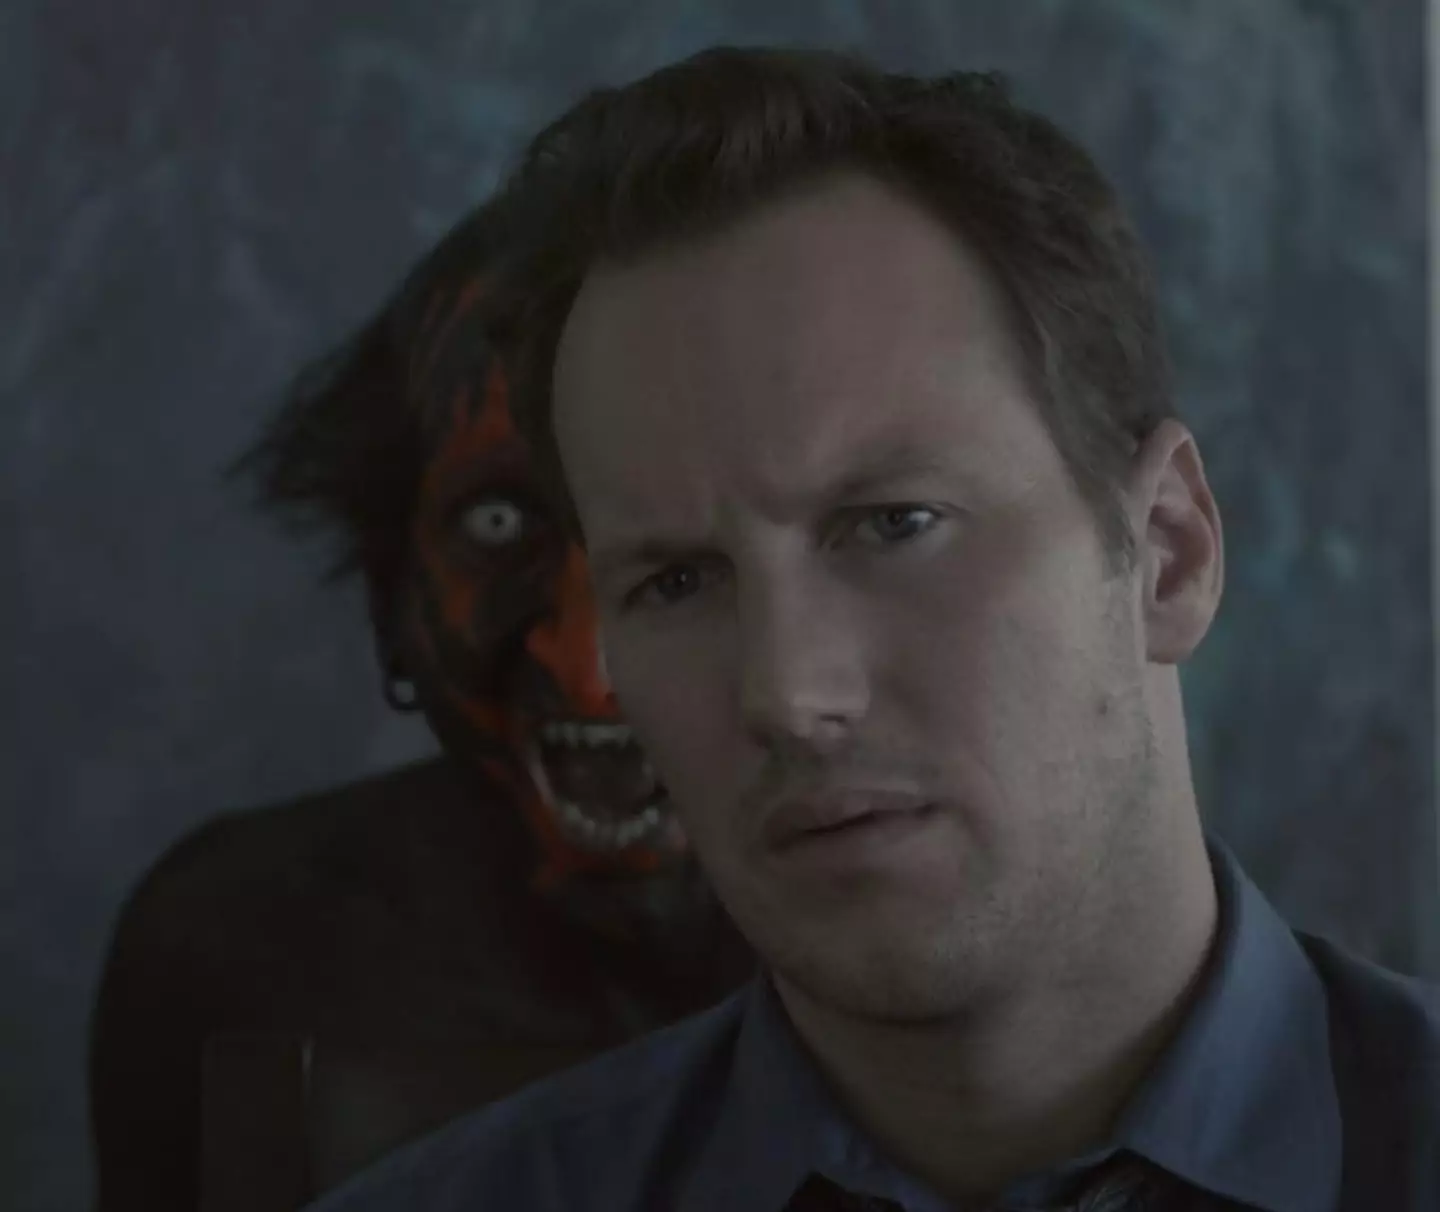 Everyone remembers the first time they watched Insidious.